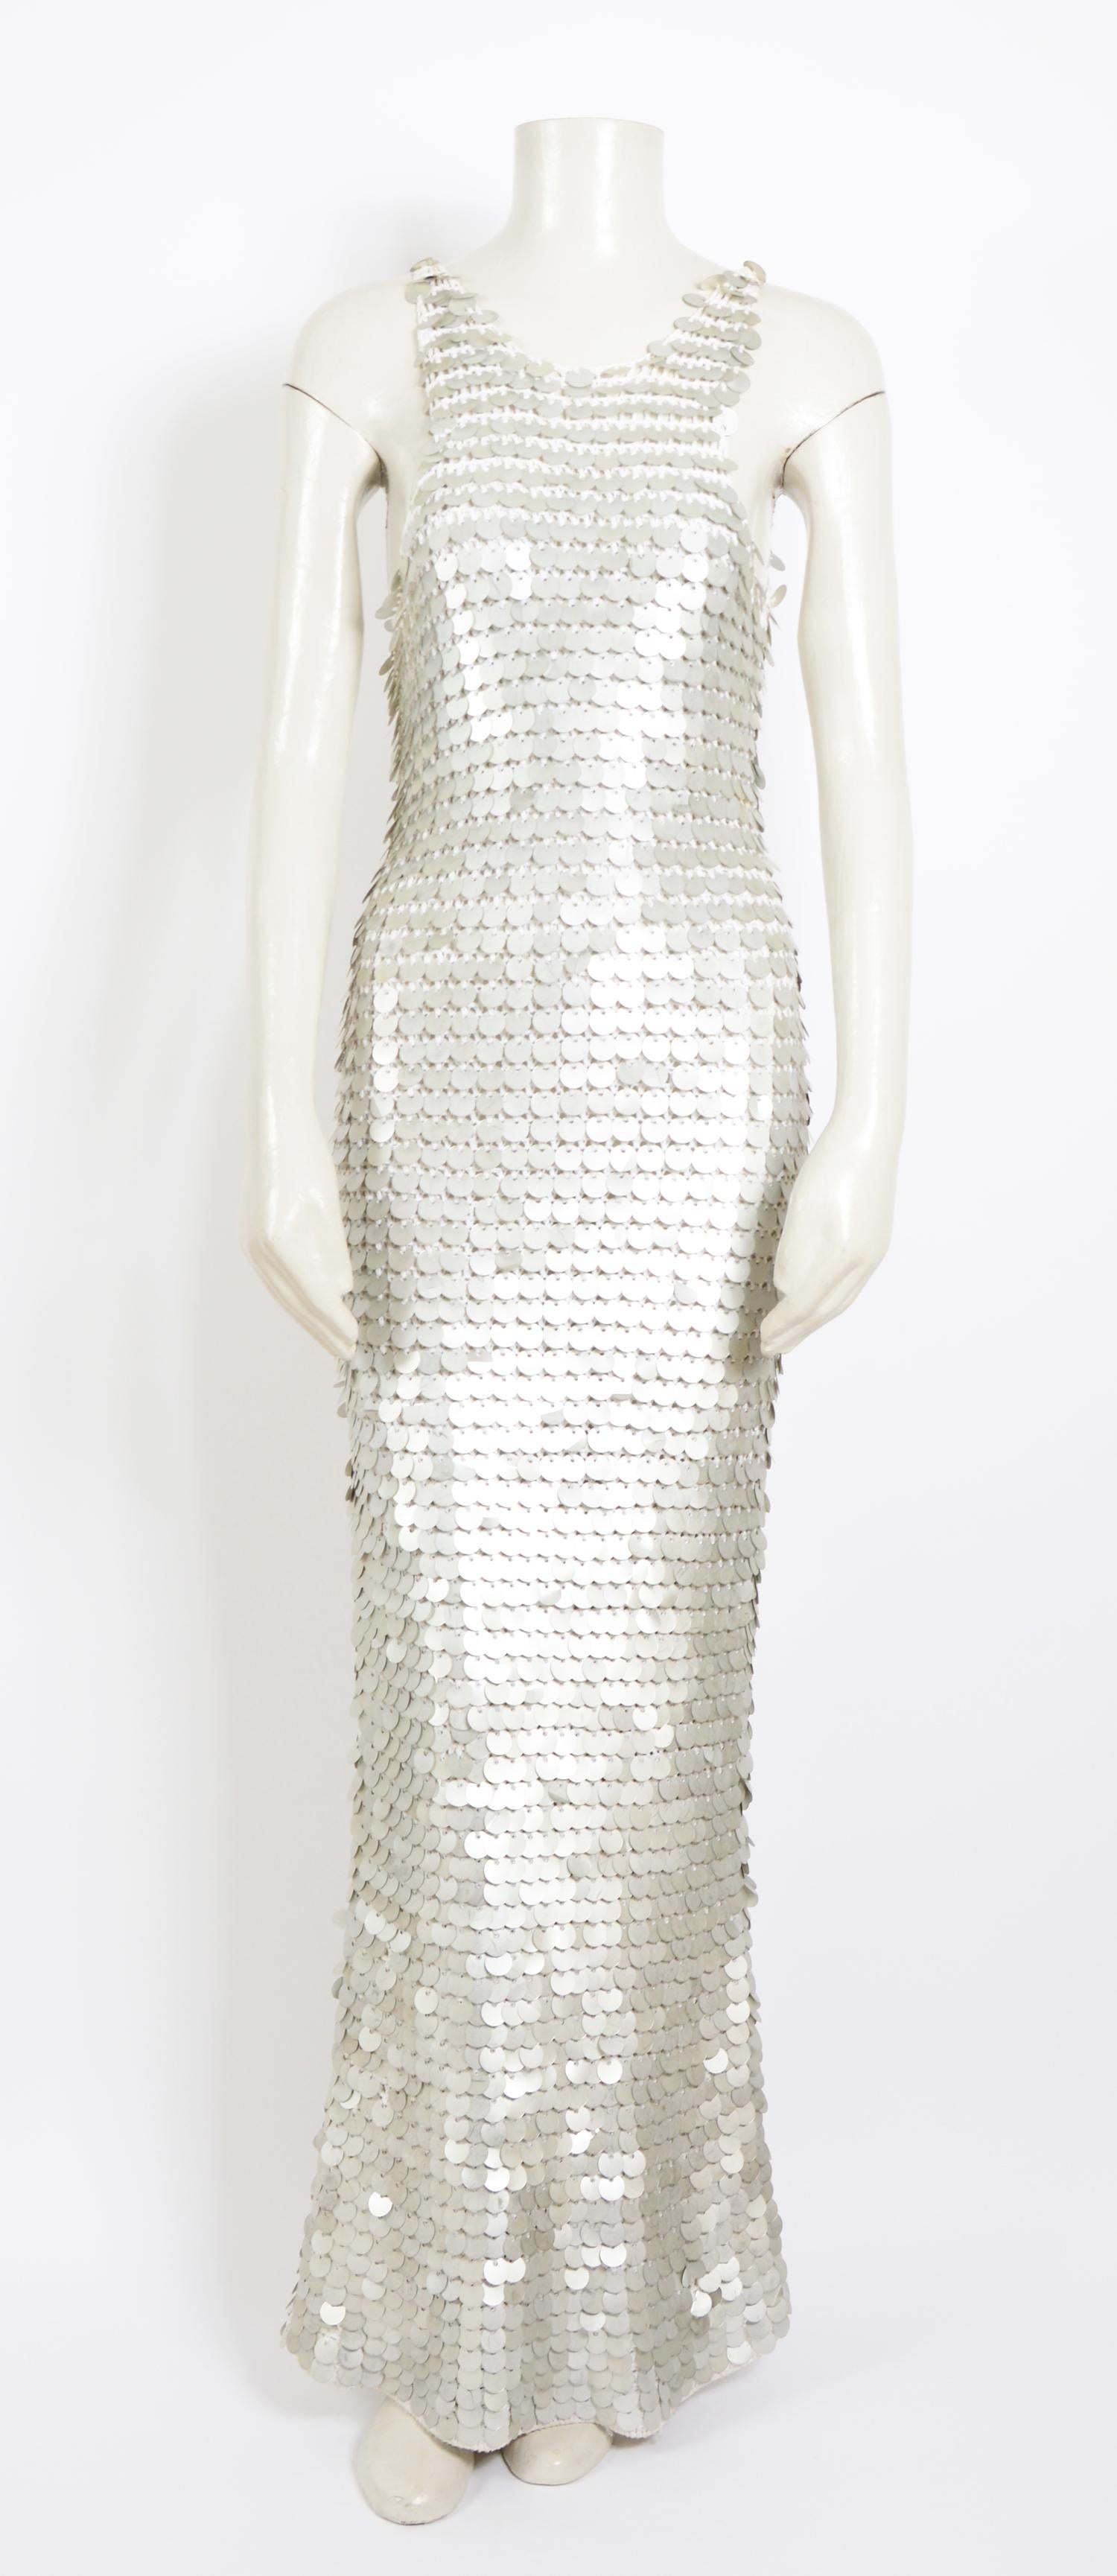 Late 60's early 70's sheer white crochet slip dress, adorned with Paco Rabanne style silver or metallic disc or sequins.
This fabulous dress is hand-crocheted from white cotton yarn.
Hundreds of oversized Paco Rabanne style metallic disc are affixed